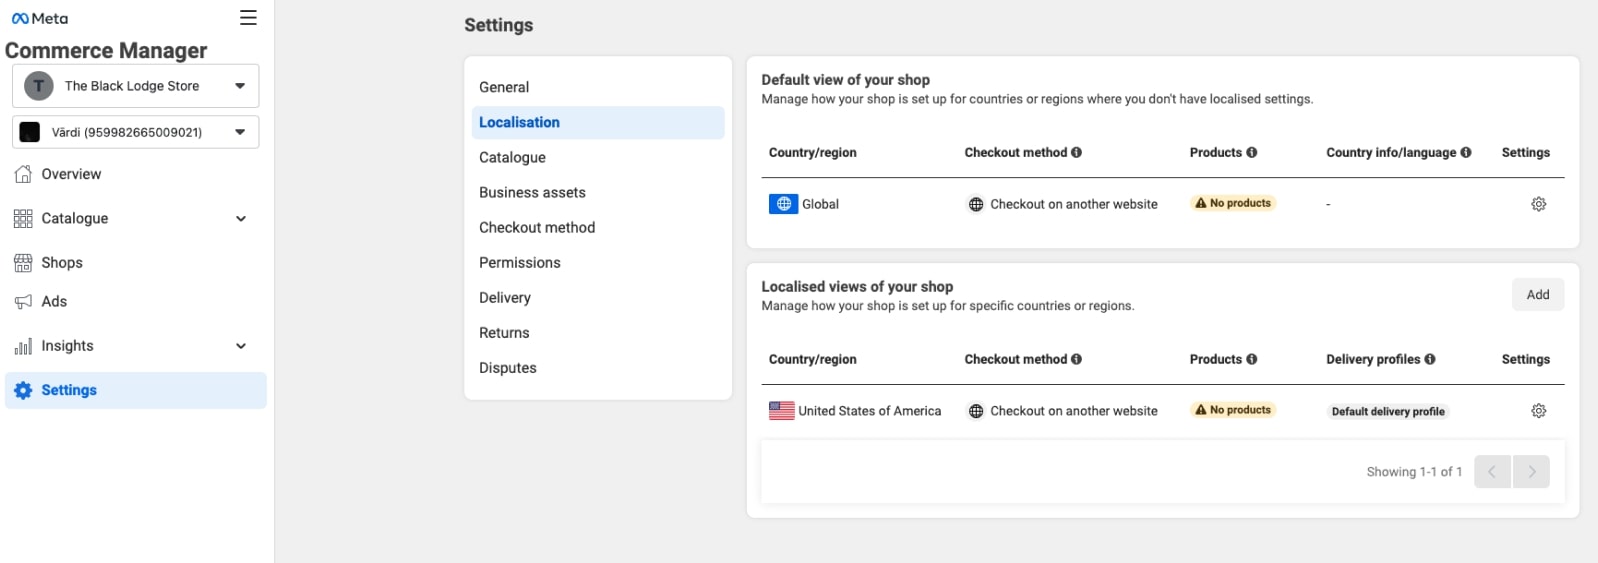 “Commerce Manager” section of Meta Business Suite with the Localization Settings highlighted.